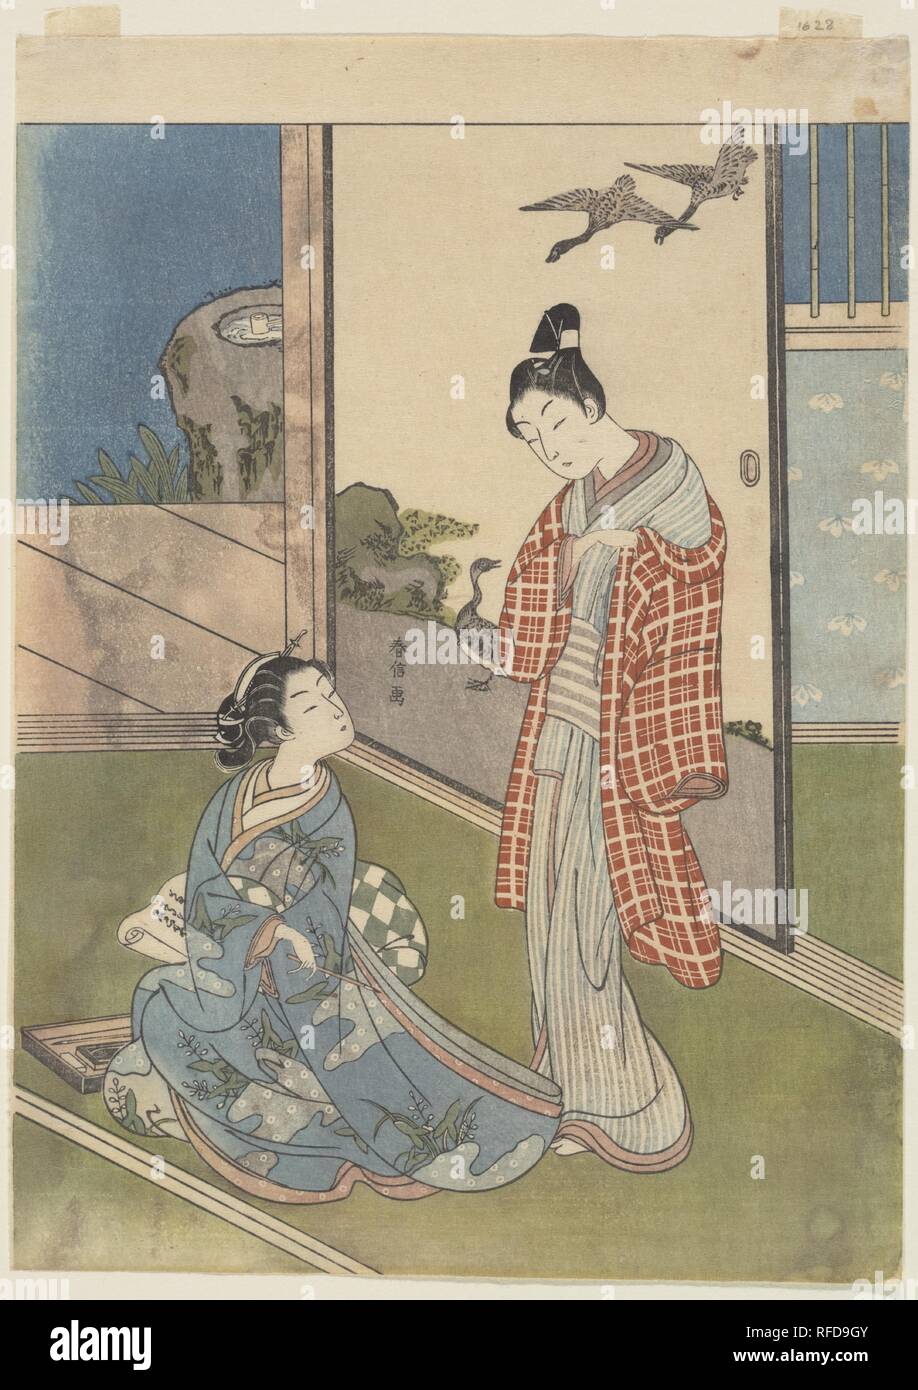 A Girl Writing a Letter. Artist: Suzuki Harunobu (Japanese, 1725-1770). Culture: Japan. Dimensions: H. 11 1/2 in. (29.2 cm); W. 8 1/4 in. (21 cm). Date: 18th century.  The seated young woman has been writing what is probably a love letter, but she attempts to hide it from the man who has just entered. The painting on the sliding screen behind the figures provides Harunobu with the opportunity to elaborate on the theme of letter writing by alluding to a classical episode from ancient Chinese history. Su Wu (J.: Sobu), a Chinese general of the Han period (206 B.C.-A.D. 220), was captured by inva Stock Photo